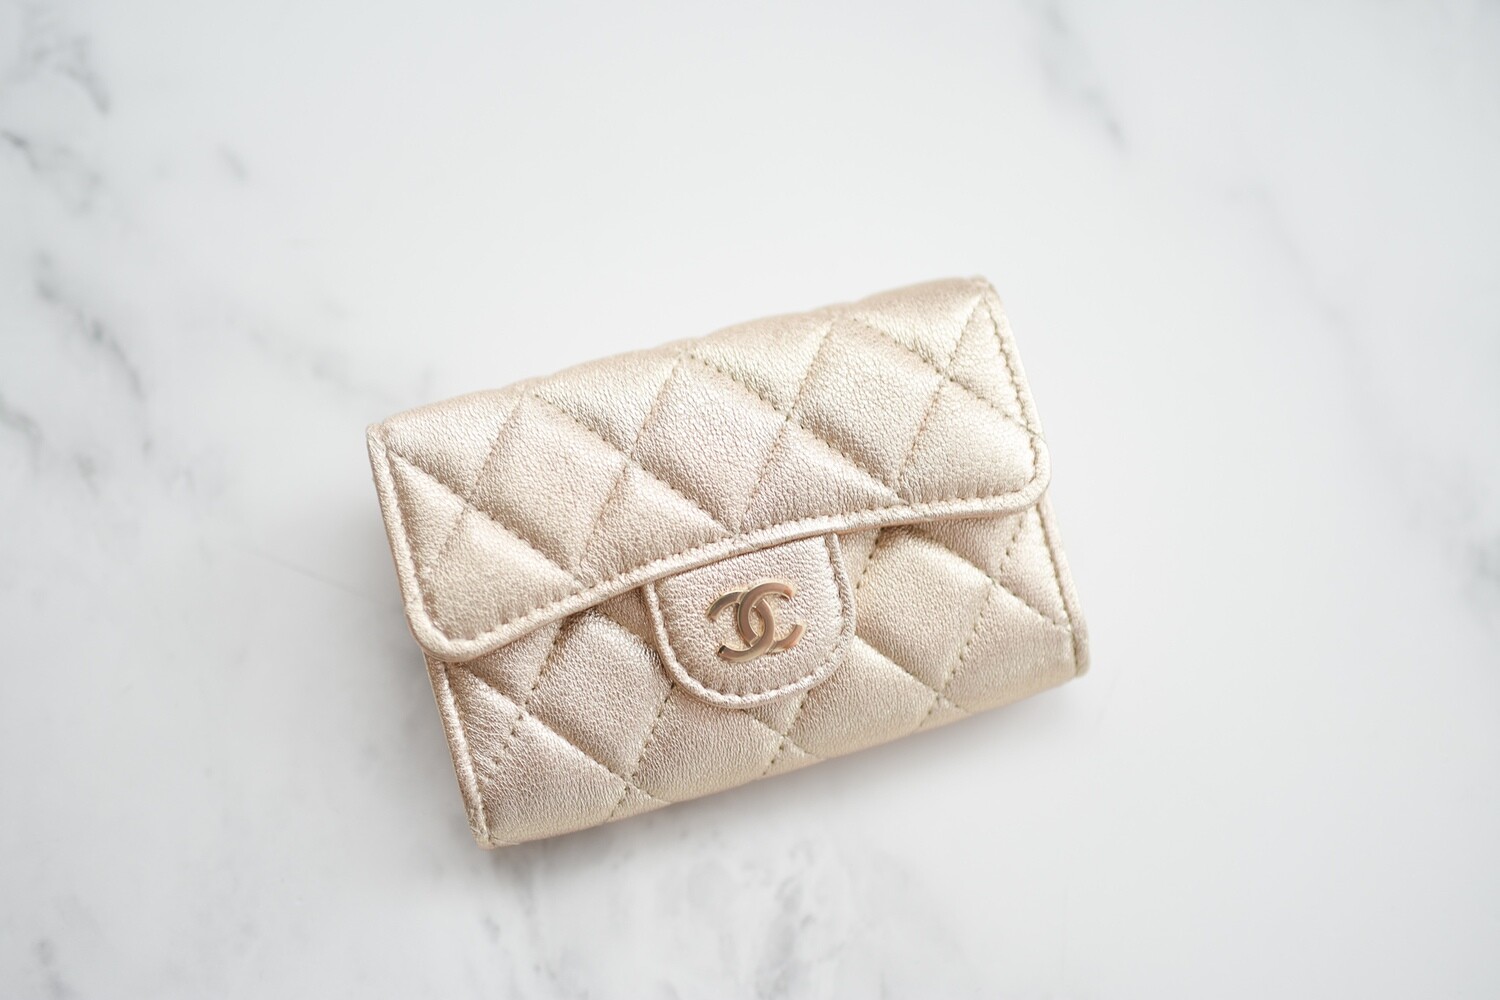 Chanel SLG Snap Card Holder, 22B White Caviar Leather with Gold Hardware,  New in Box GA001